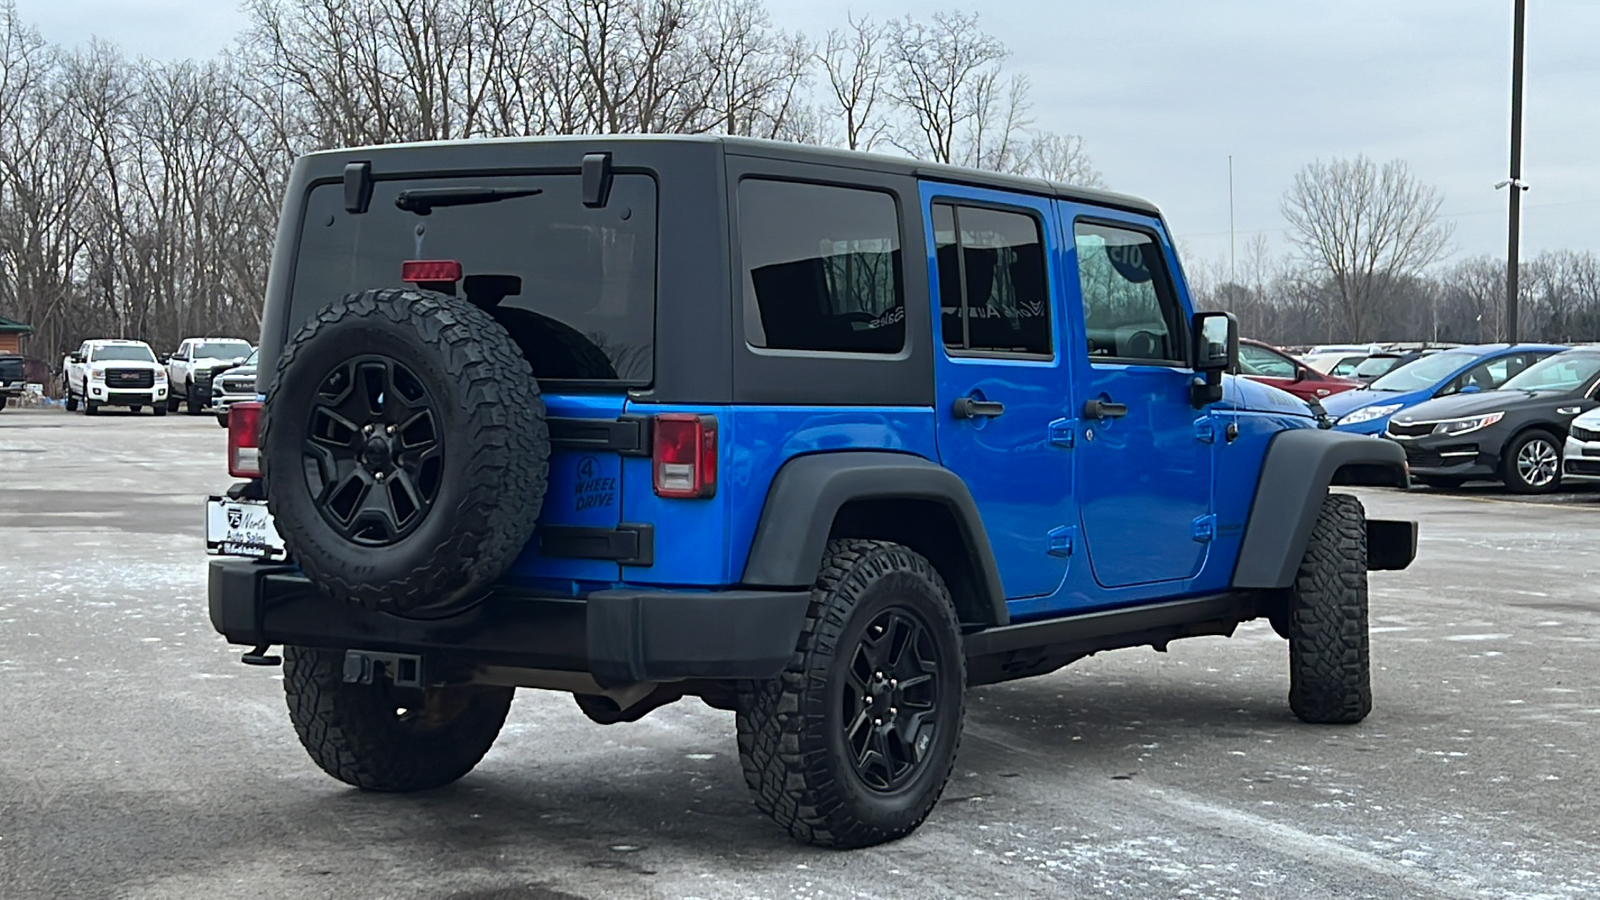 2015 Jeep Wrangler Unlimited Willys 5